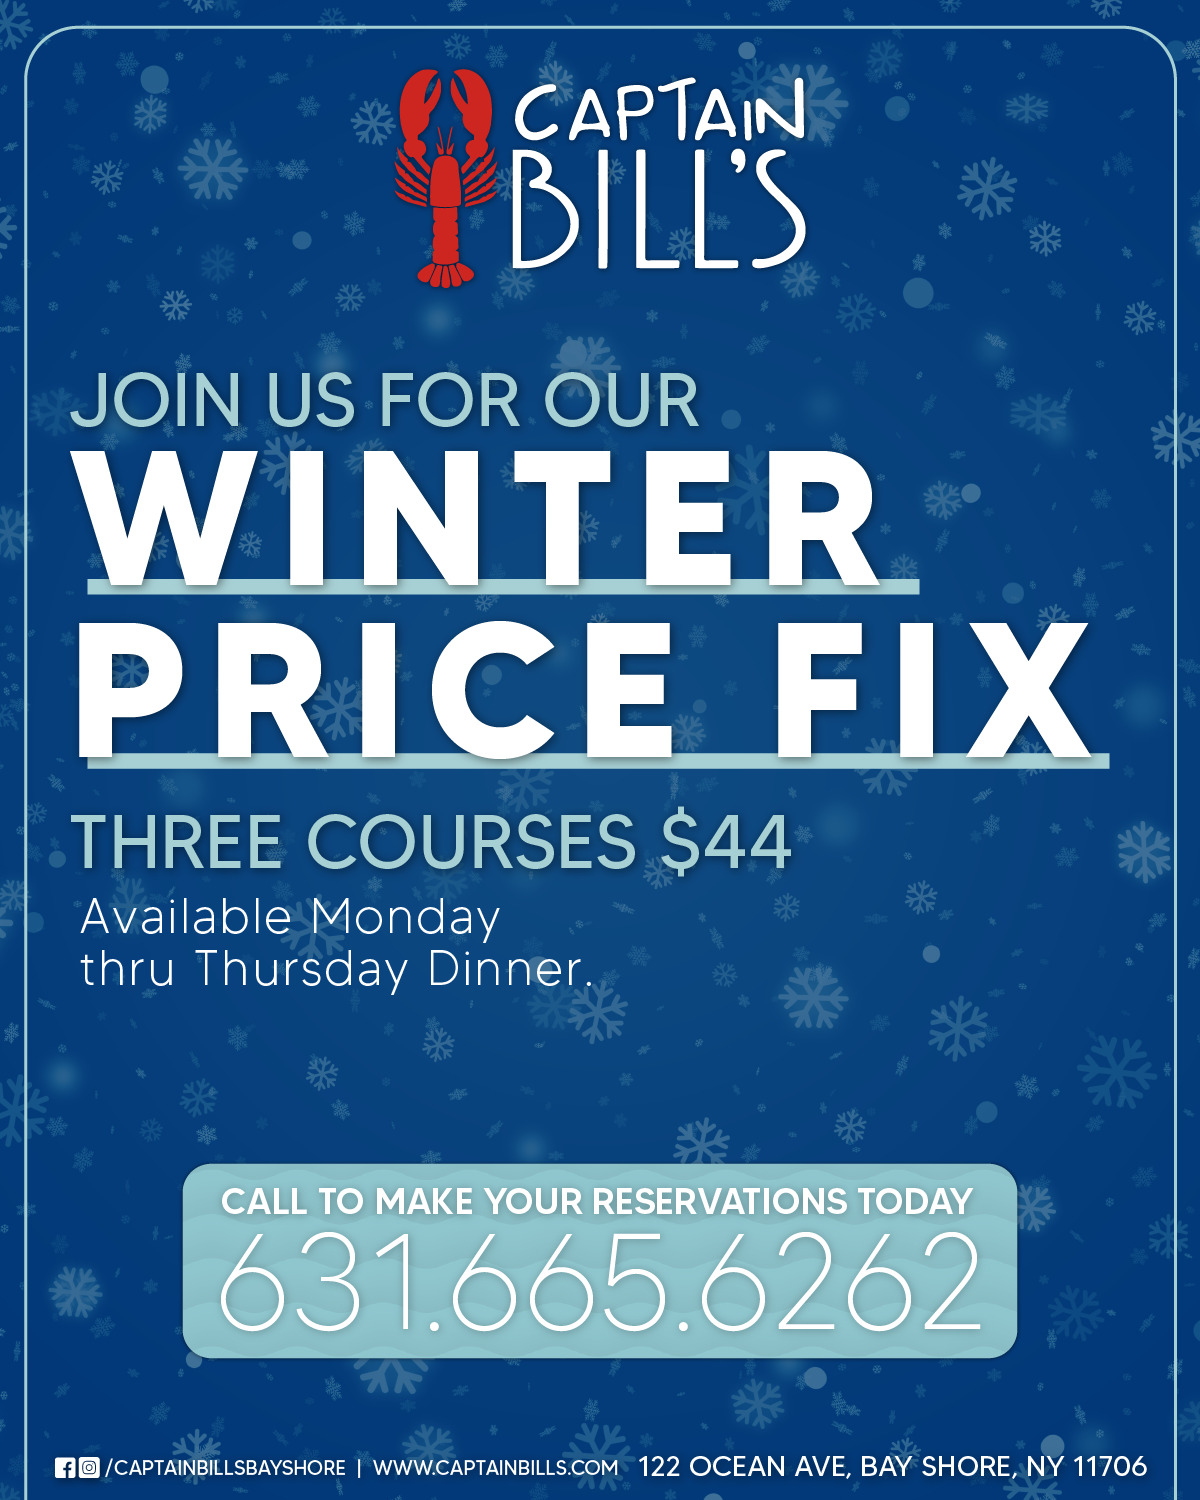 Our Winter Price Fixe!